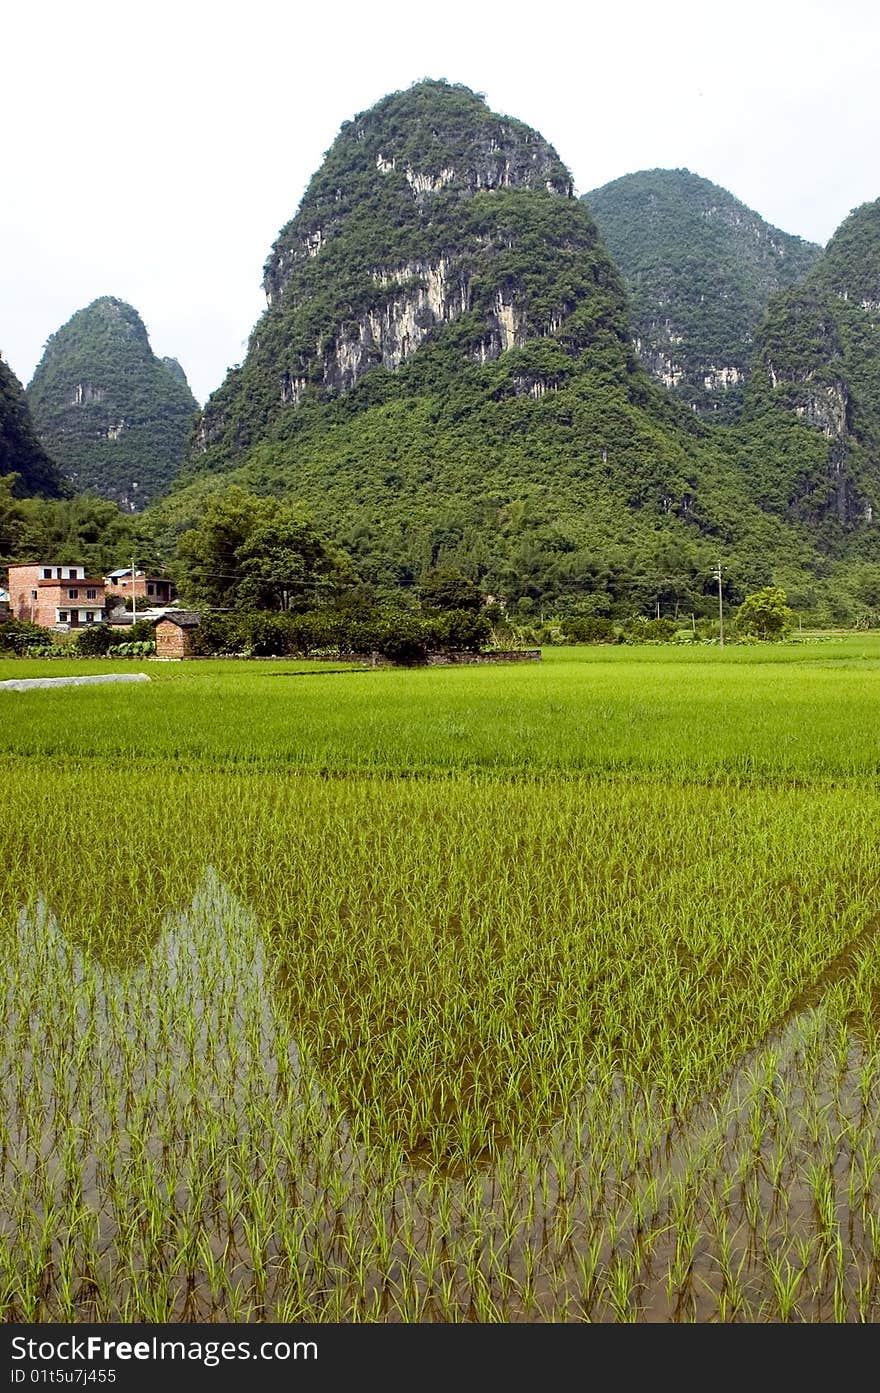 Rice fields in China, Guilin city, Yangshou town - small villages surrounded by green rice fields and hills. Beautiful scenery of Guilin. Rice fields in China, Guilin city, Yangshou town - small villages surrounded by green rice fields and hills. Beautiful scenery of Guilin.